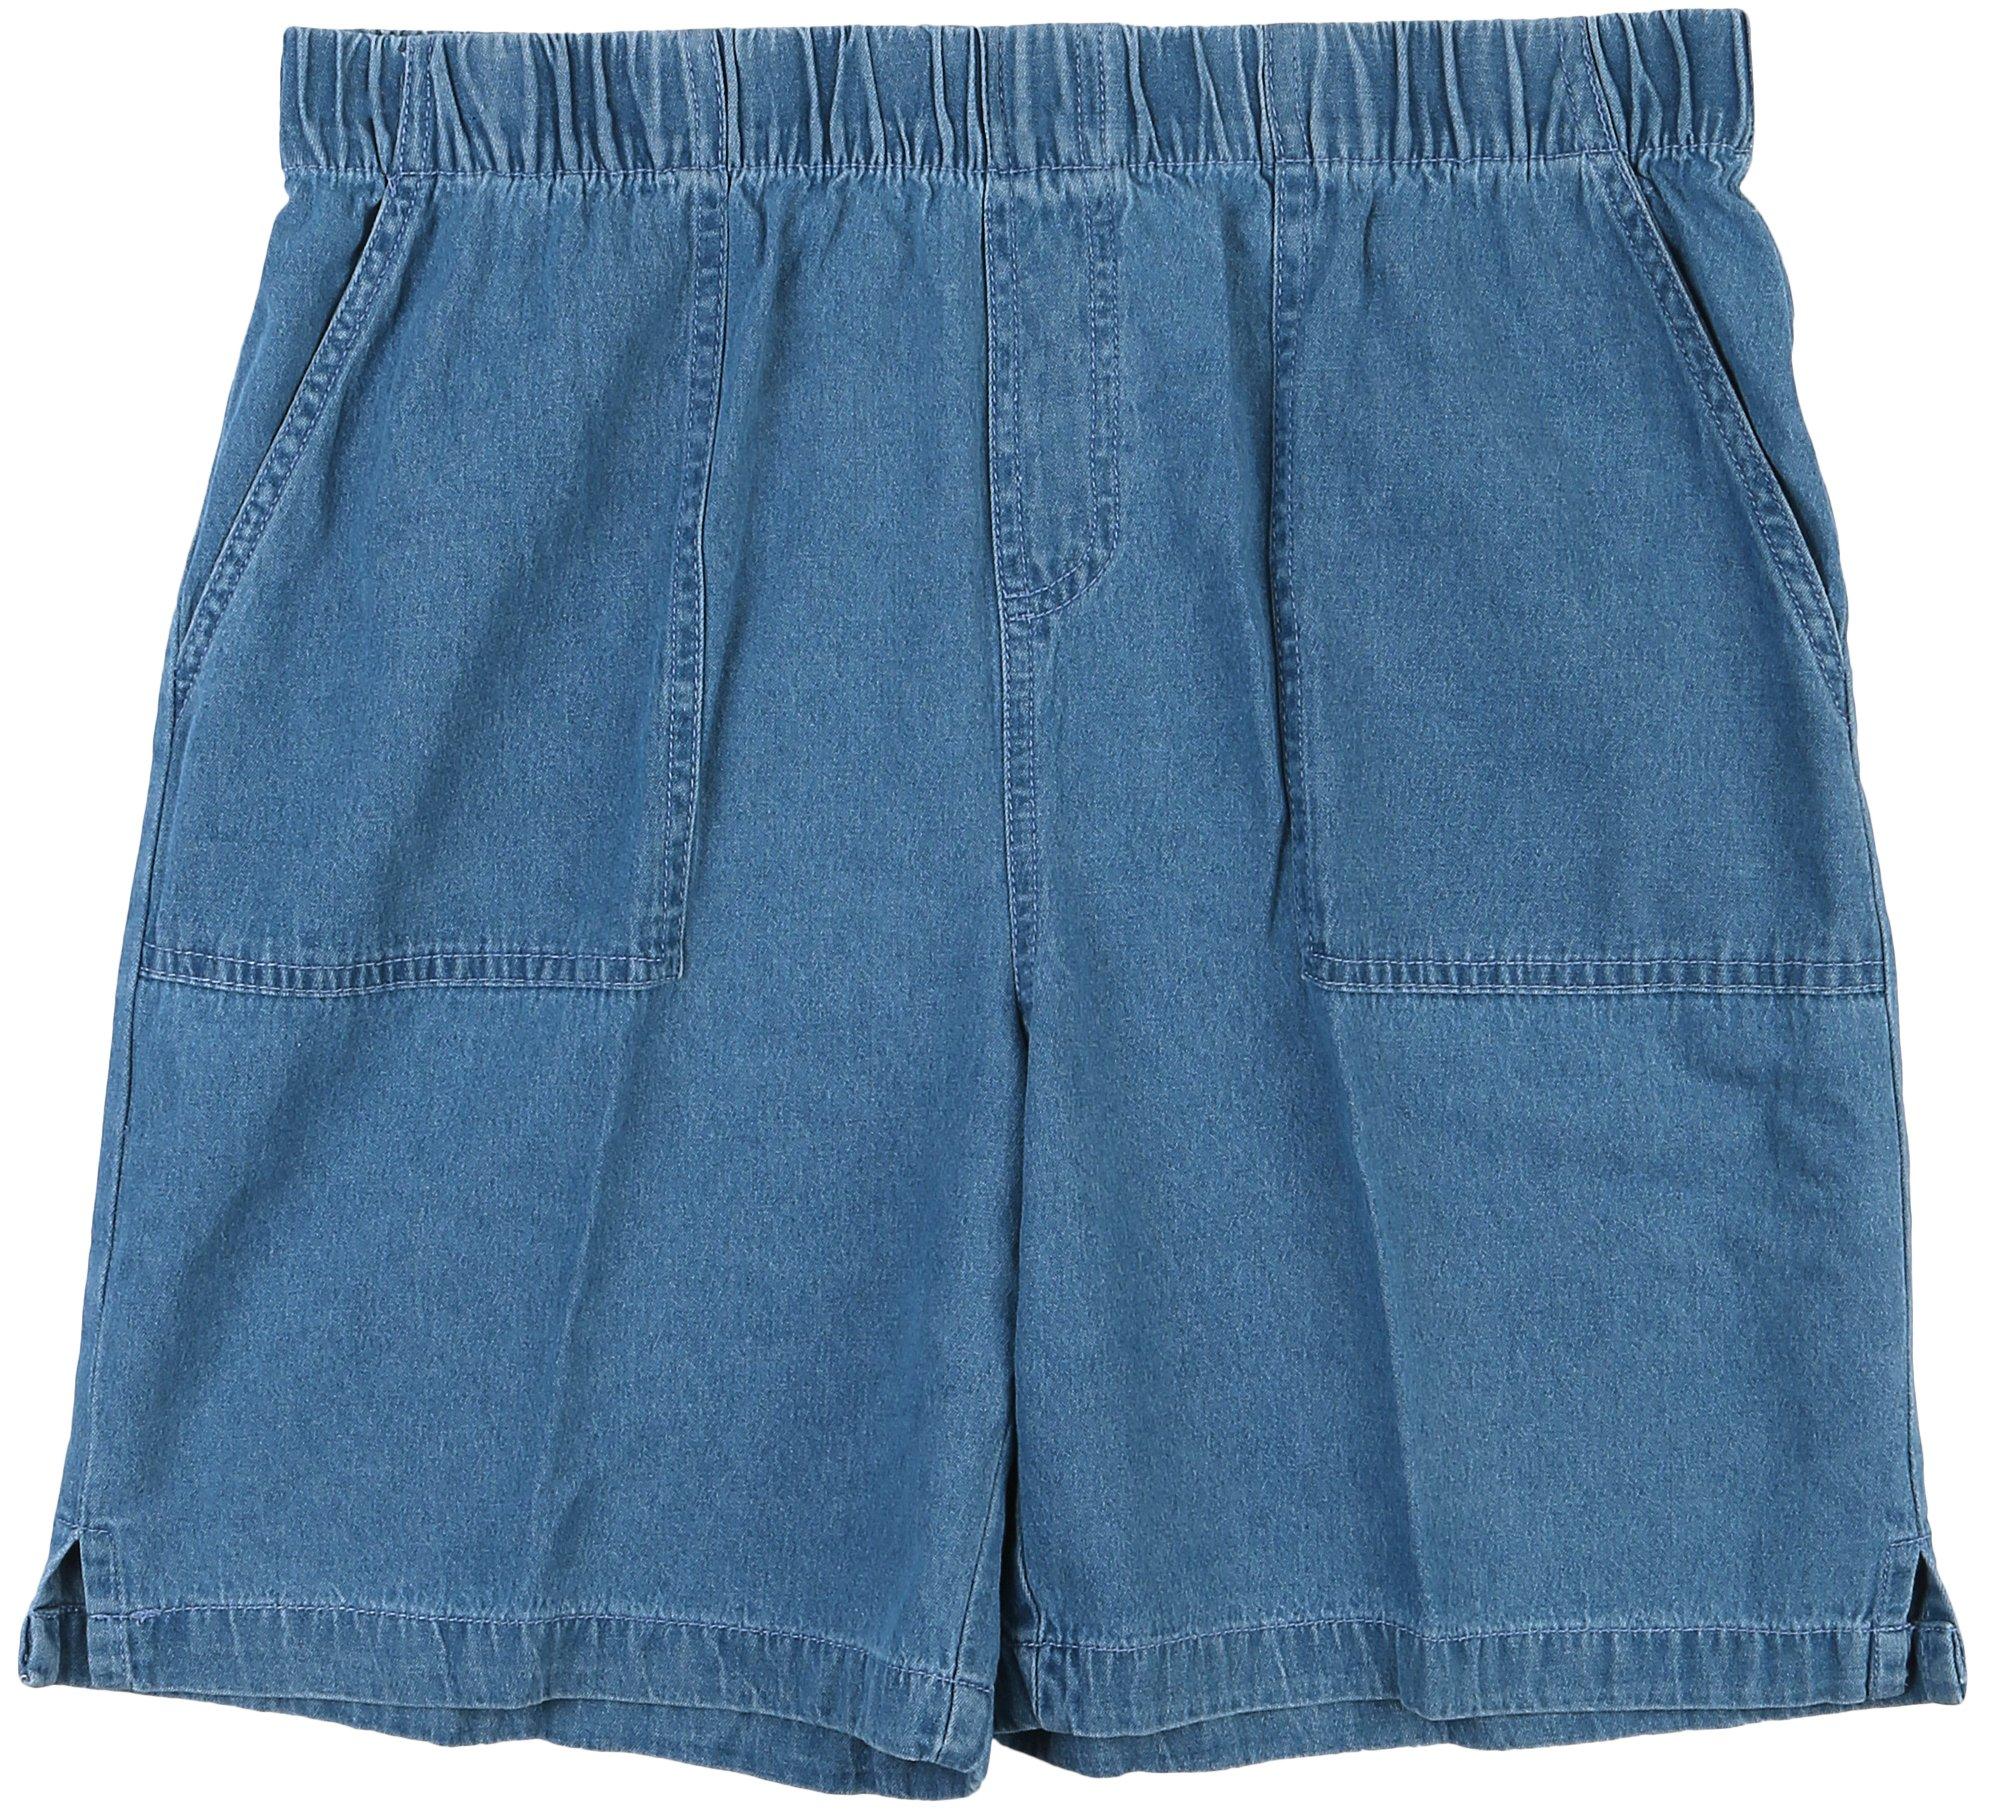 Coral Bay Womens 7 in. Bermuda Pull On Shorts